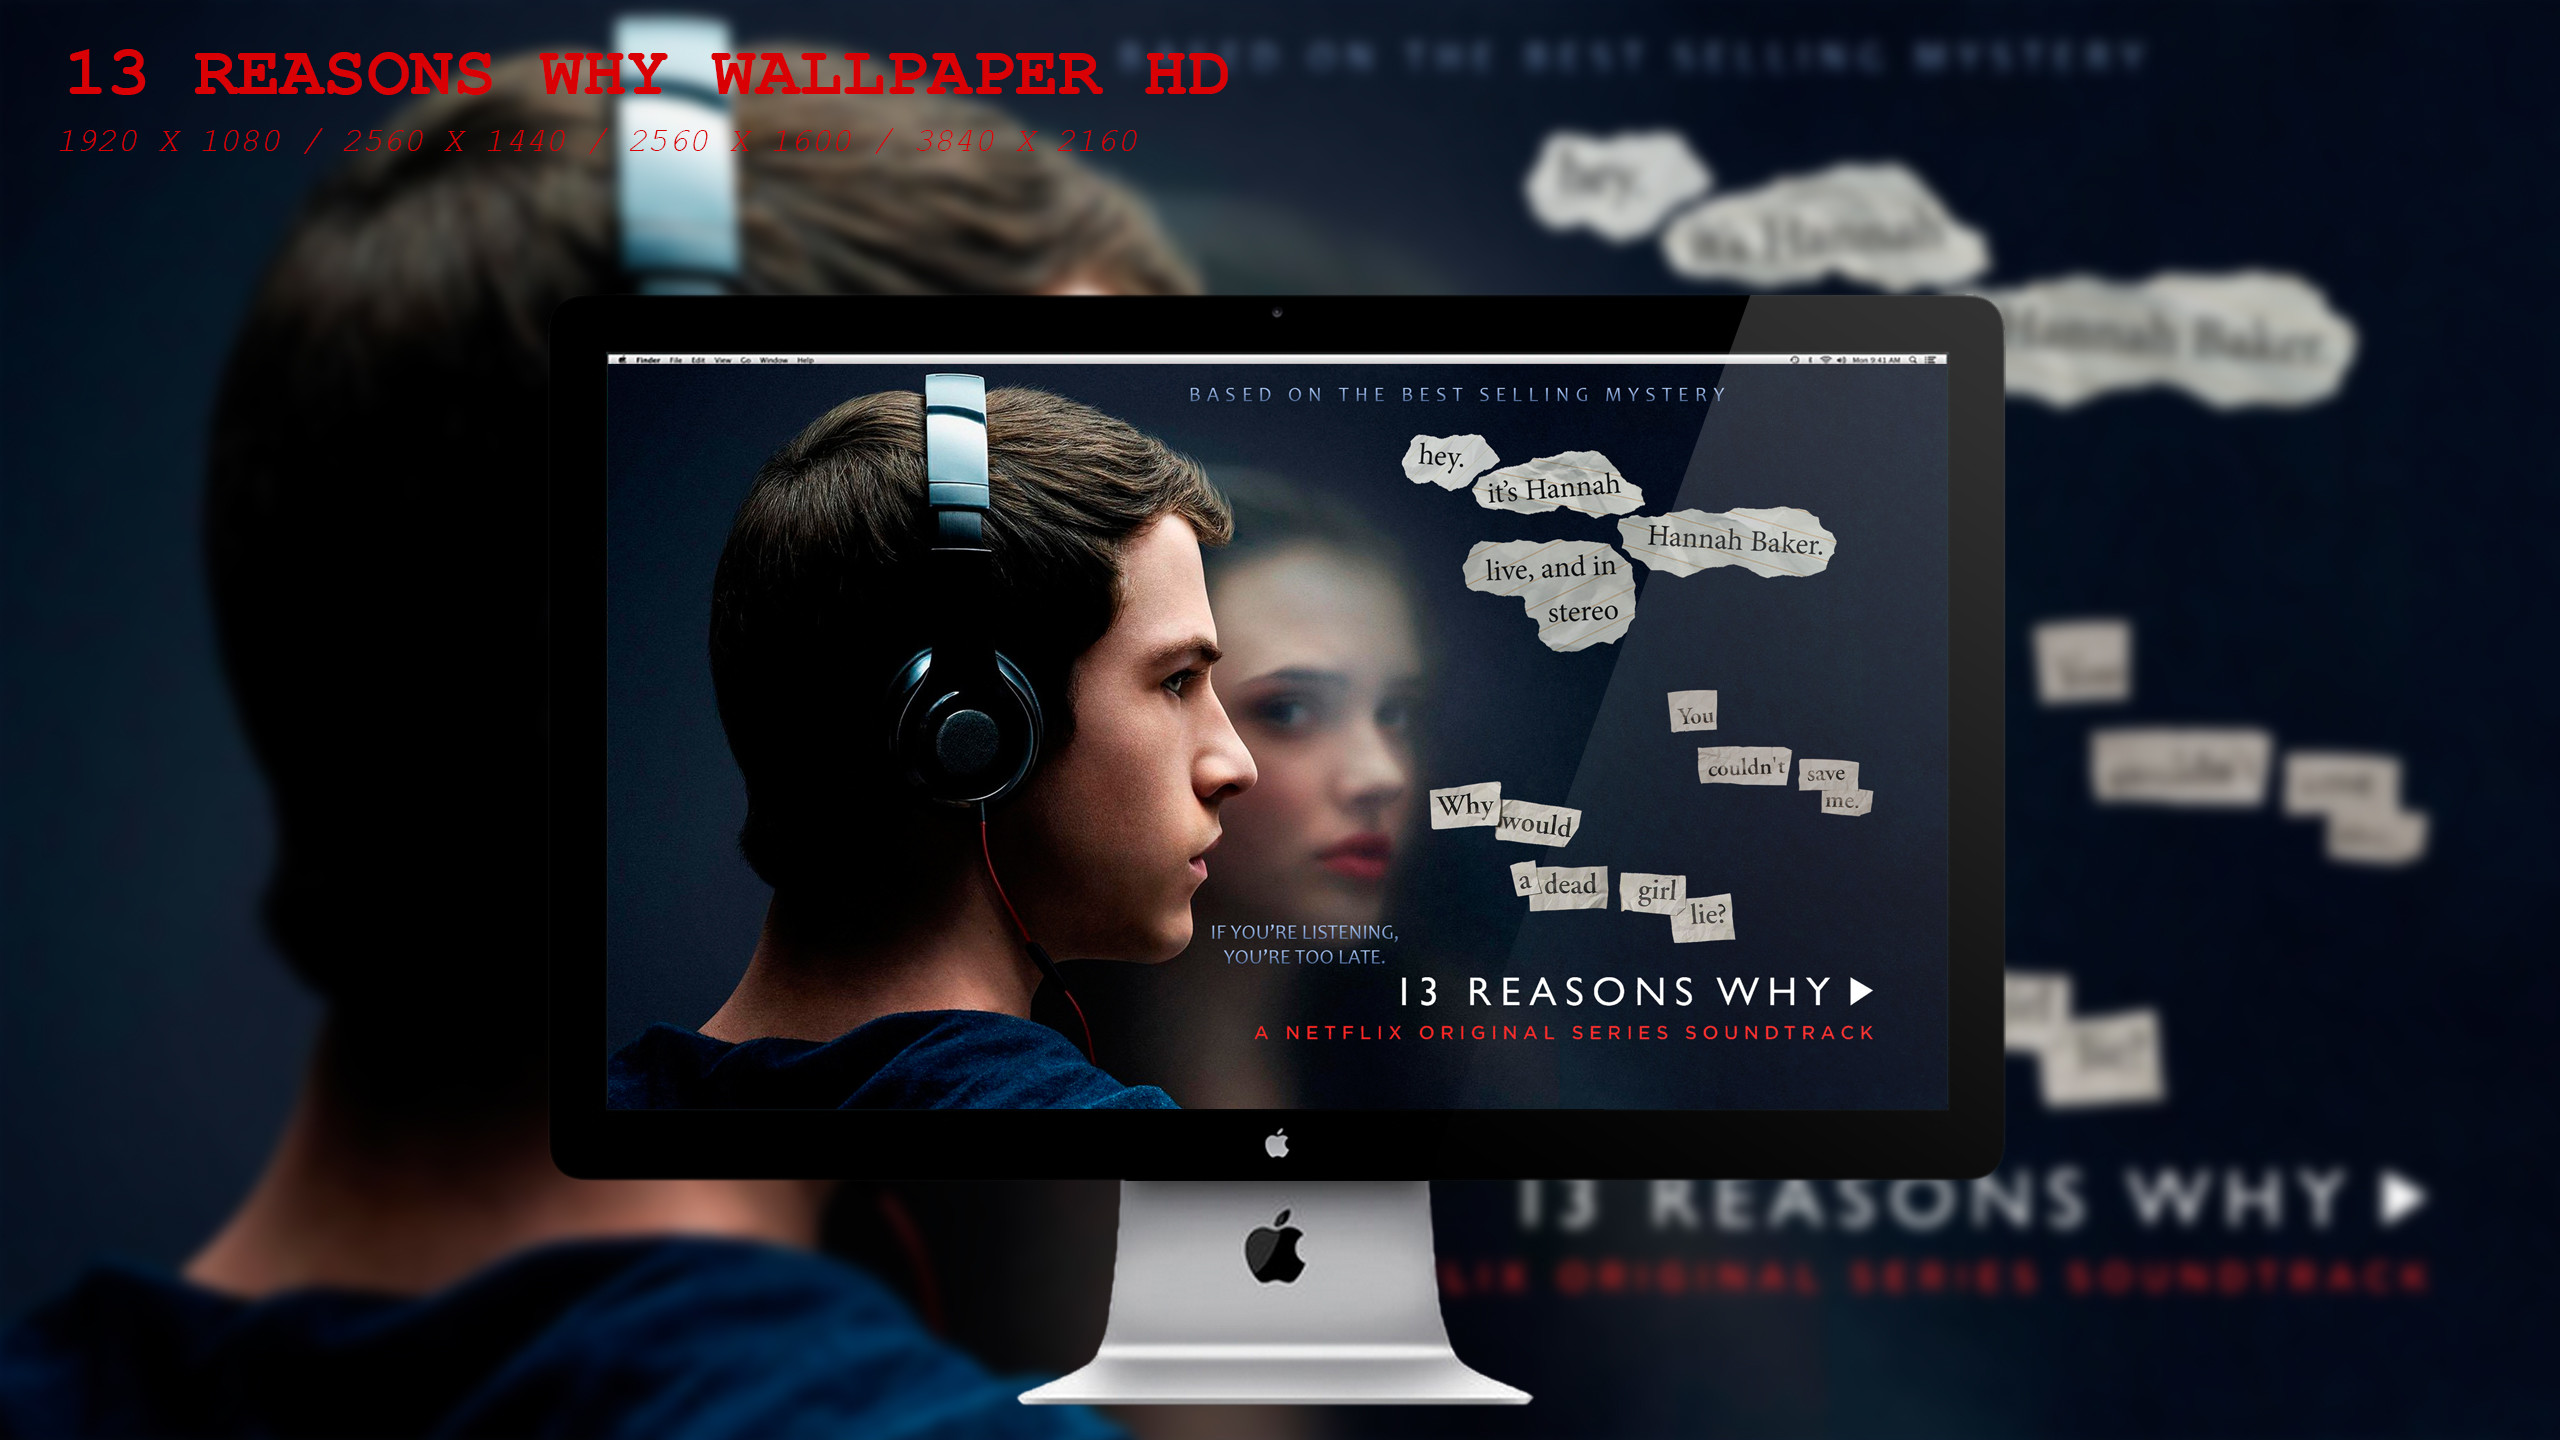 2560x1440 ... 13 Reasons Why Wallpaper HD by BeAware8